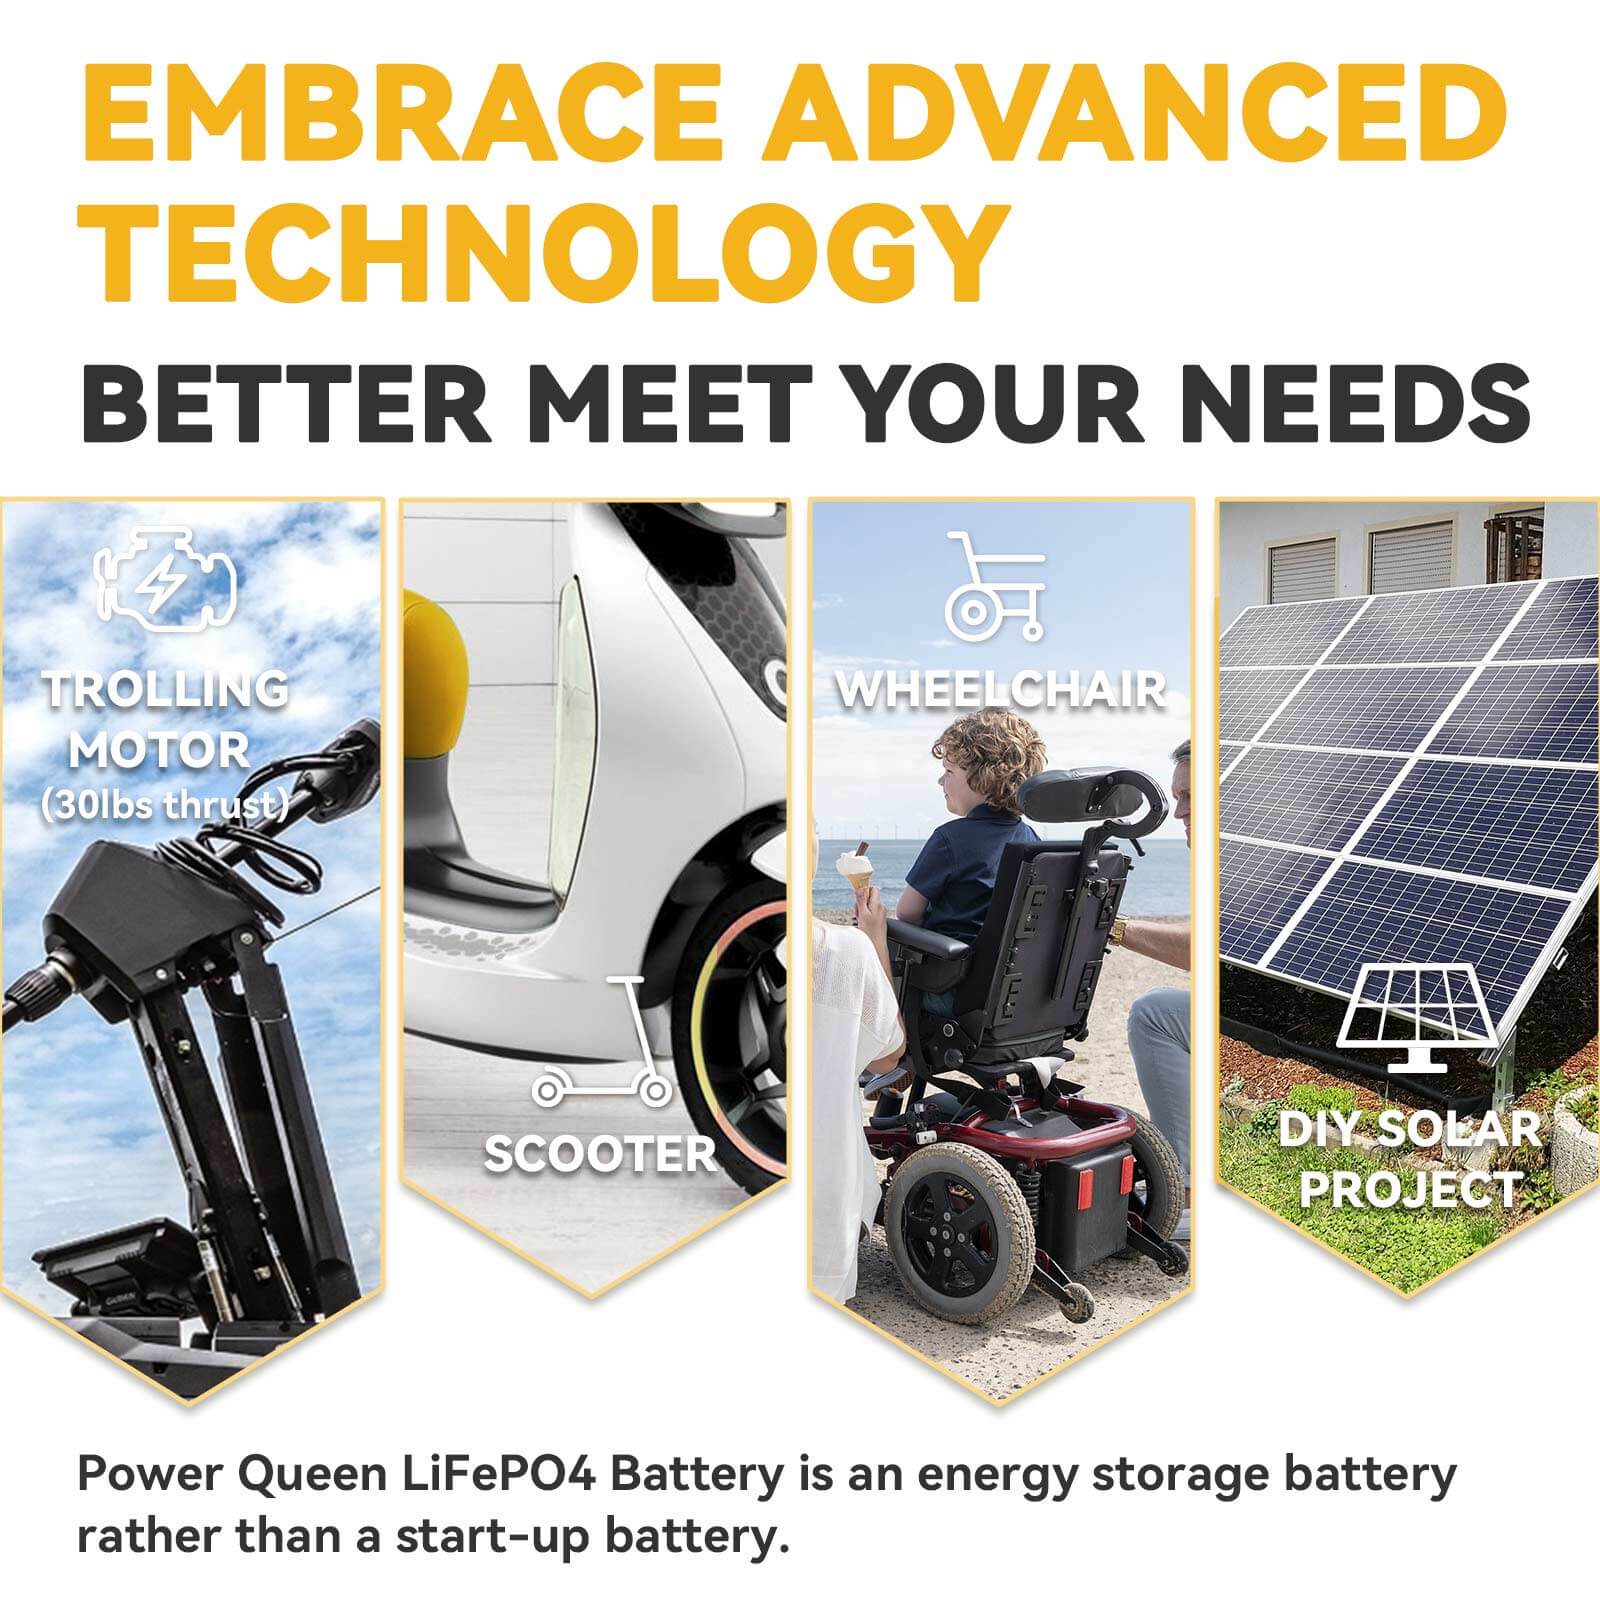 [Only C$242.49]Power Queen 12V 50Ah LiFePO4 Battery